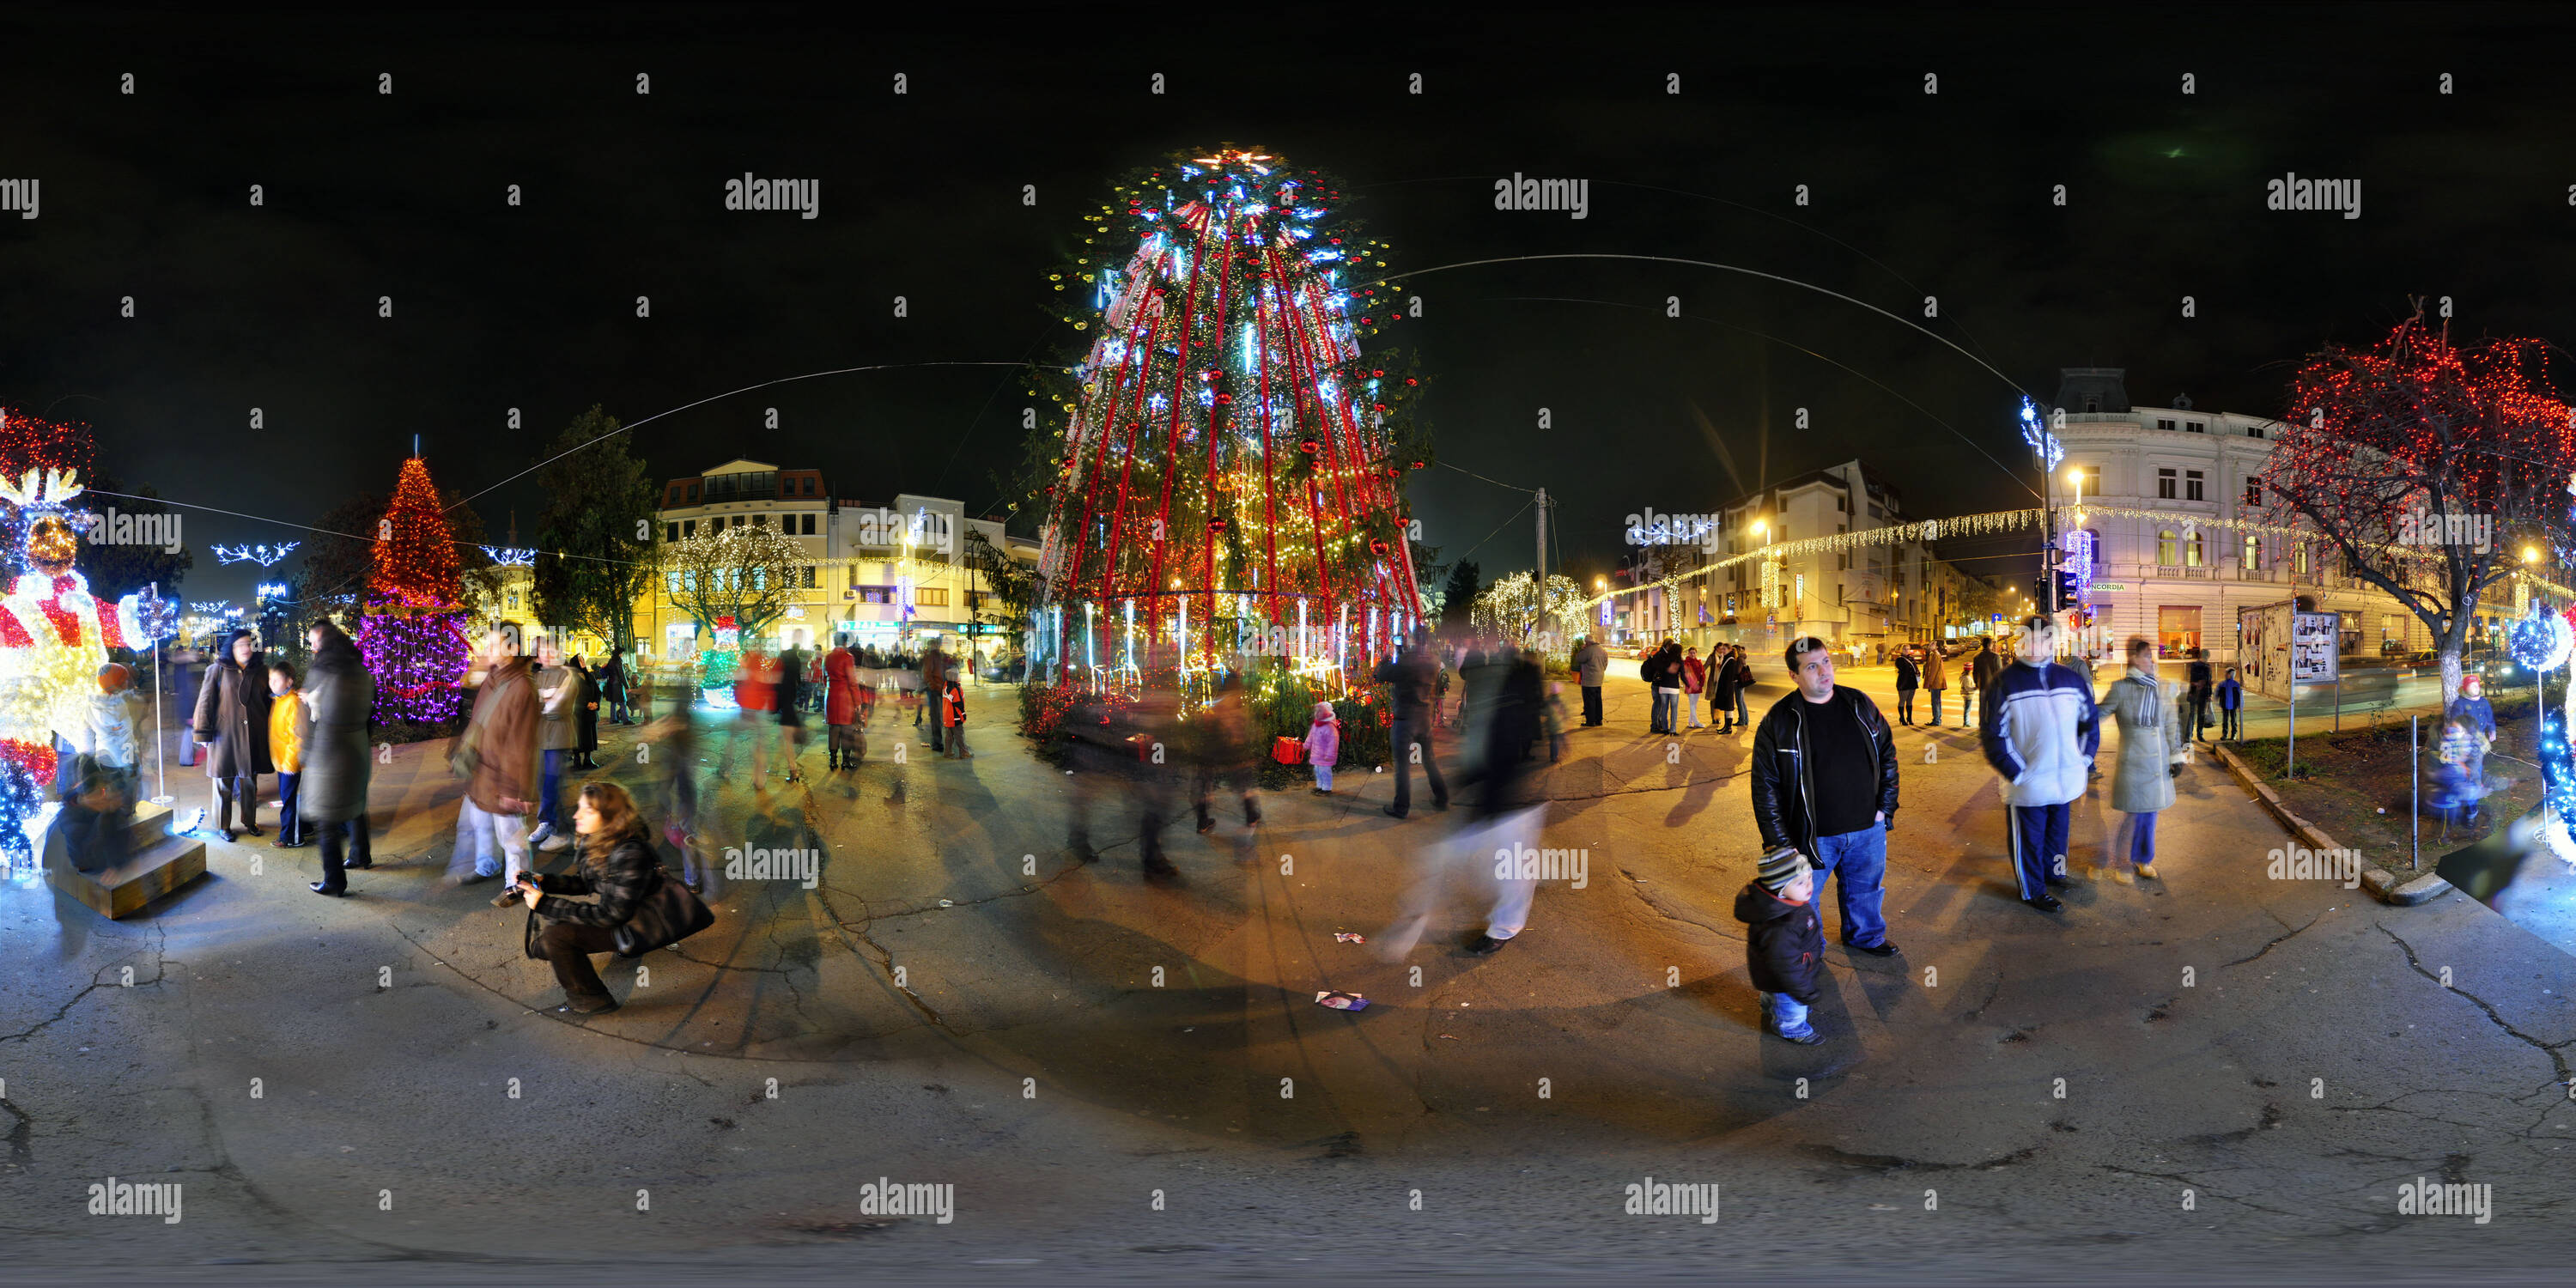 360 degree panoramic view of The Christmas Tree in the Roses Square in Targu Mures